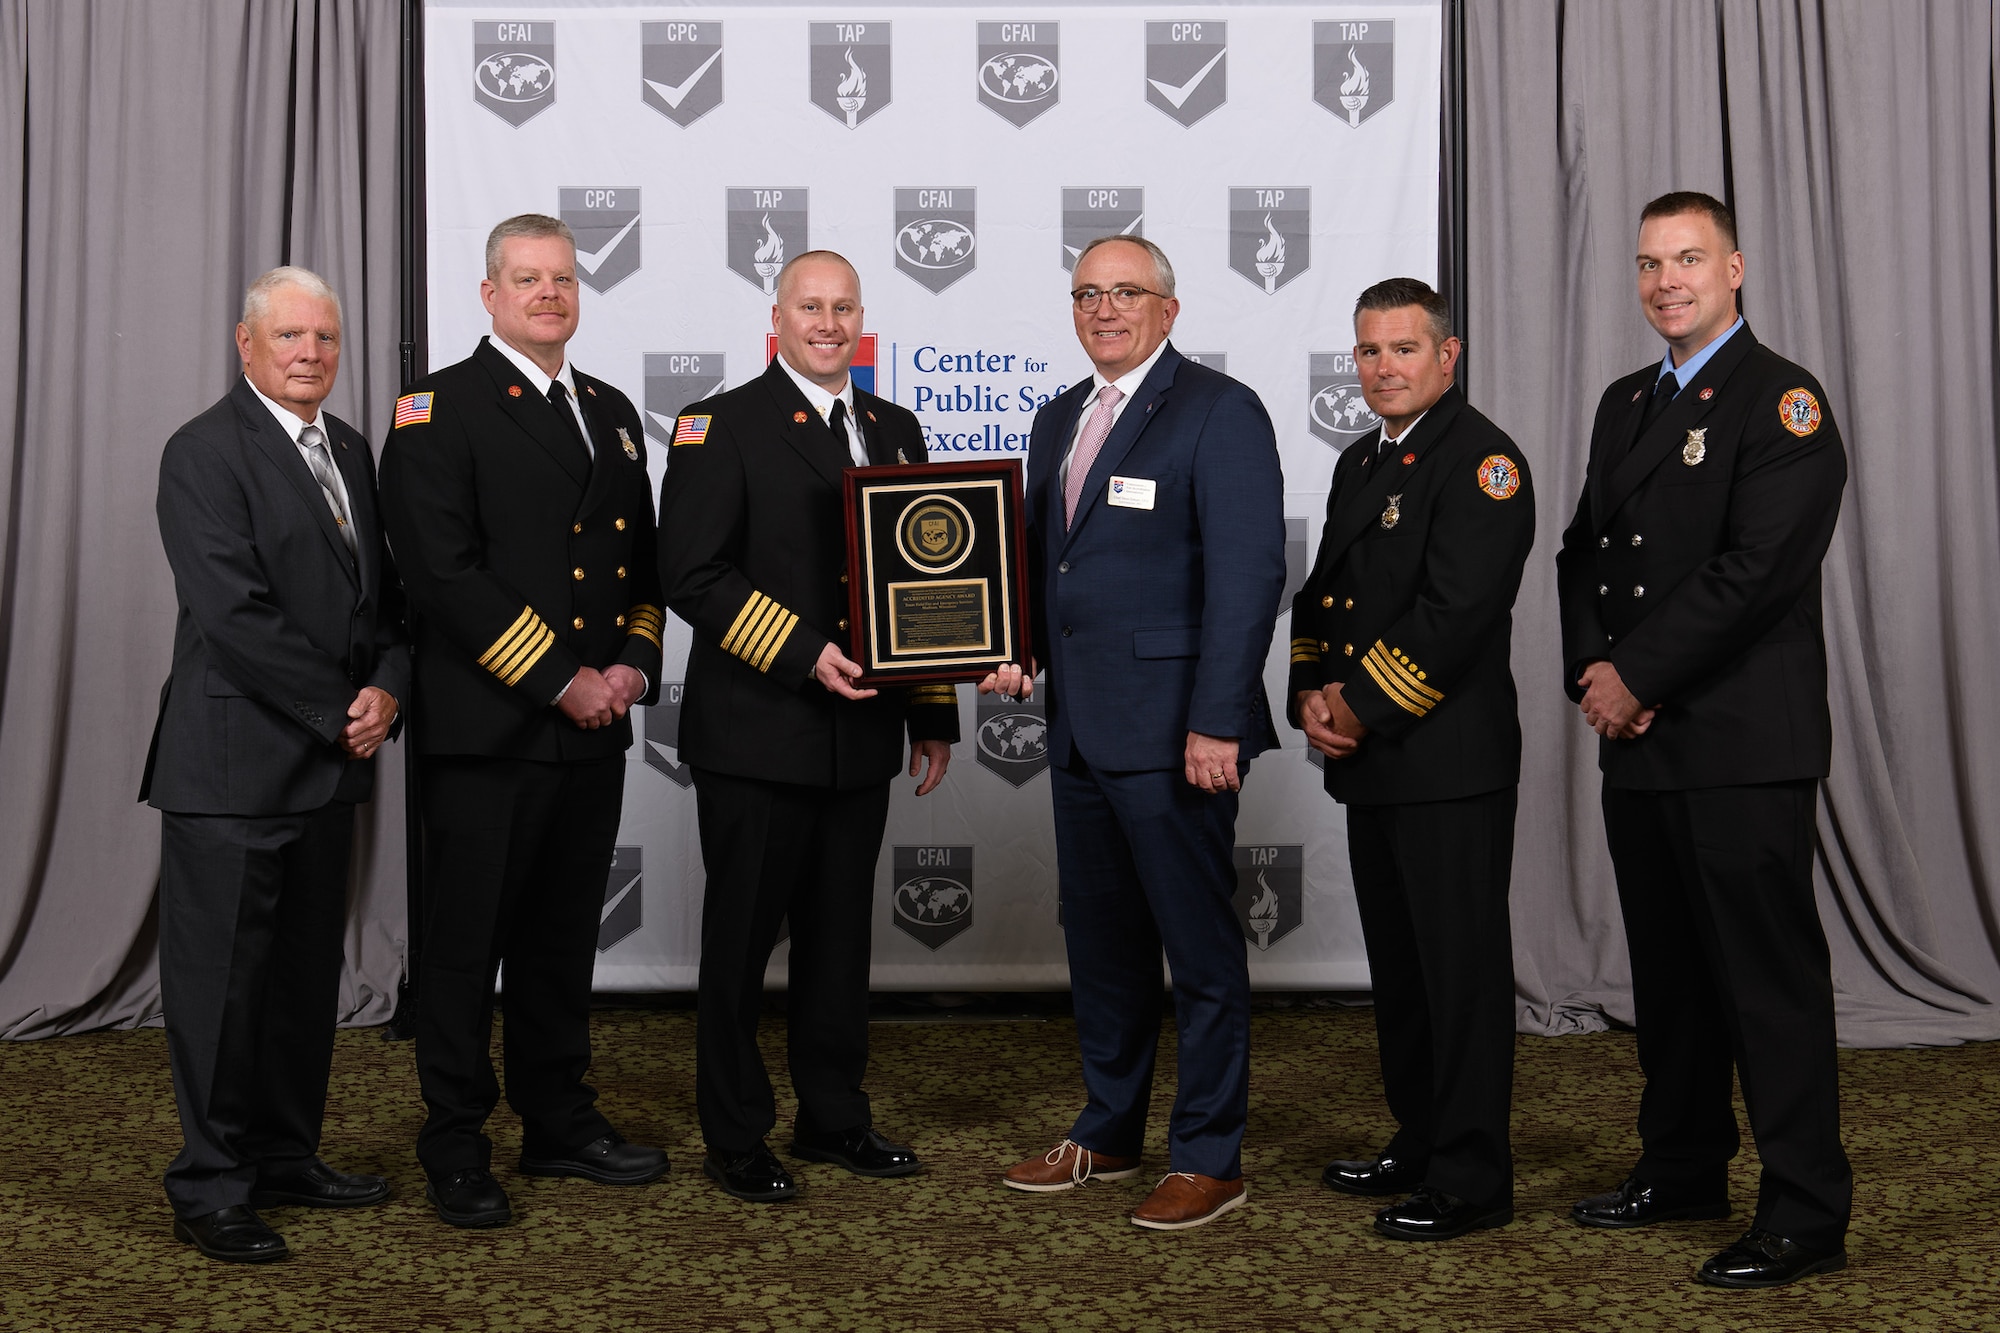 Chief Fire Officer Steven Dirksen, chair of the Commission on Fire Accreditation International presents a plaque to the Truax Field Fire and Emergency Services leadership team upon their department’s accreditation by the organization in Orlando, Florida, March 23, 2022.